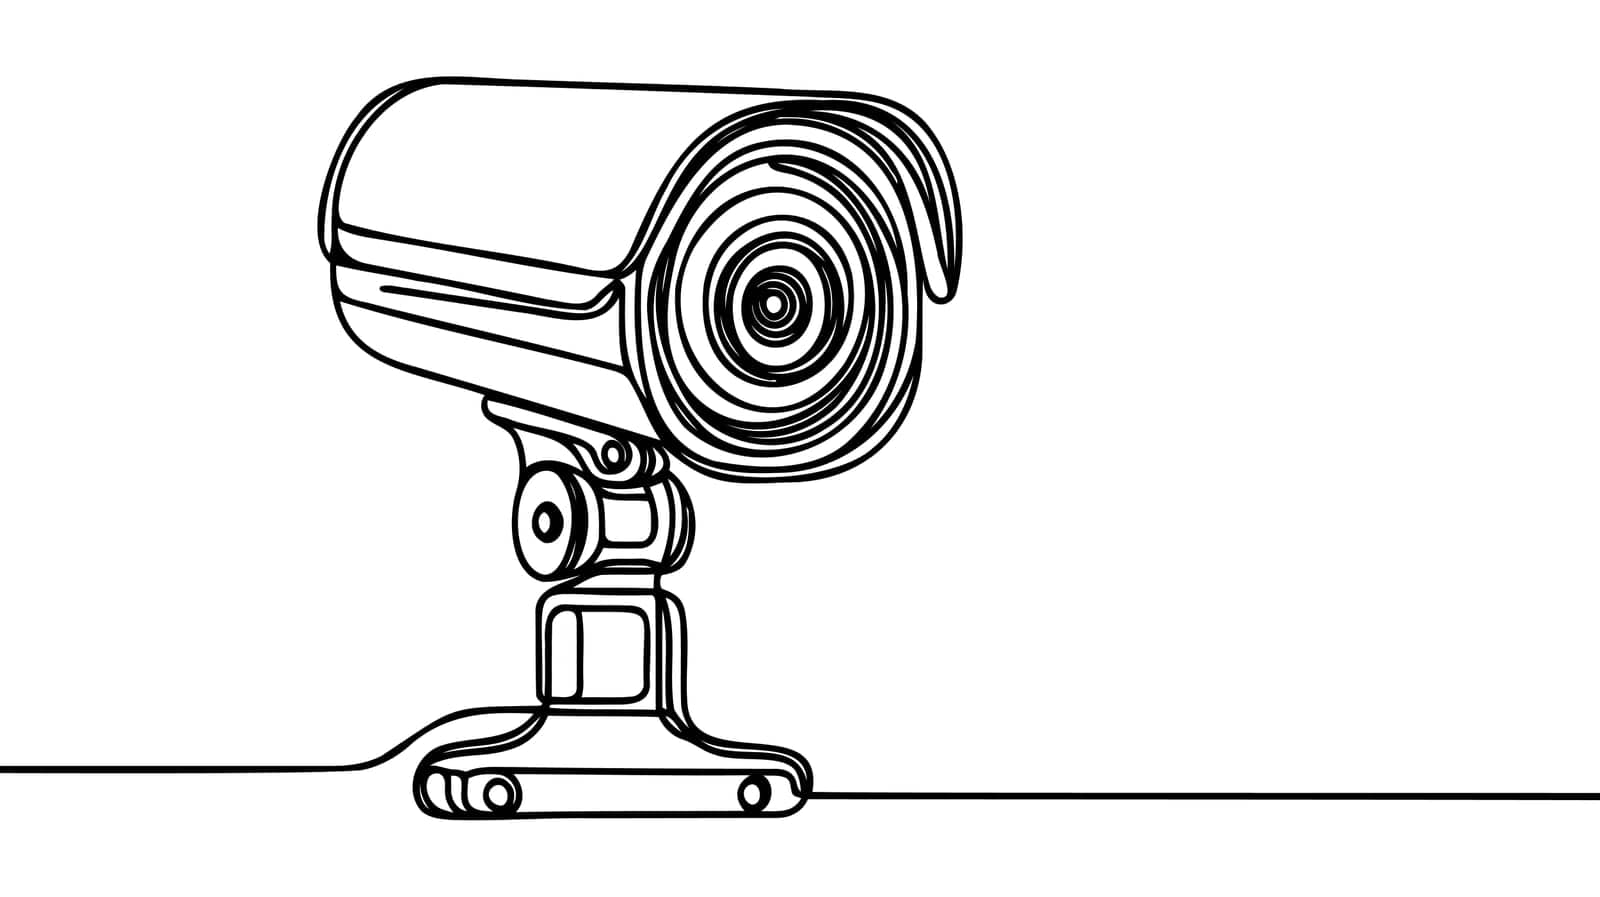 Continuous one line drawing of outdoor surveillance camera vector design. Single line illustration on the theme of CCTV, security camera and face recognition people traffic on transparent background